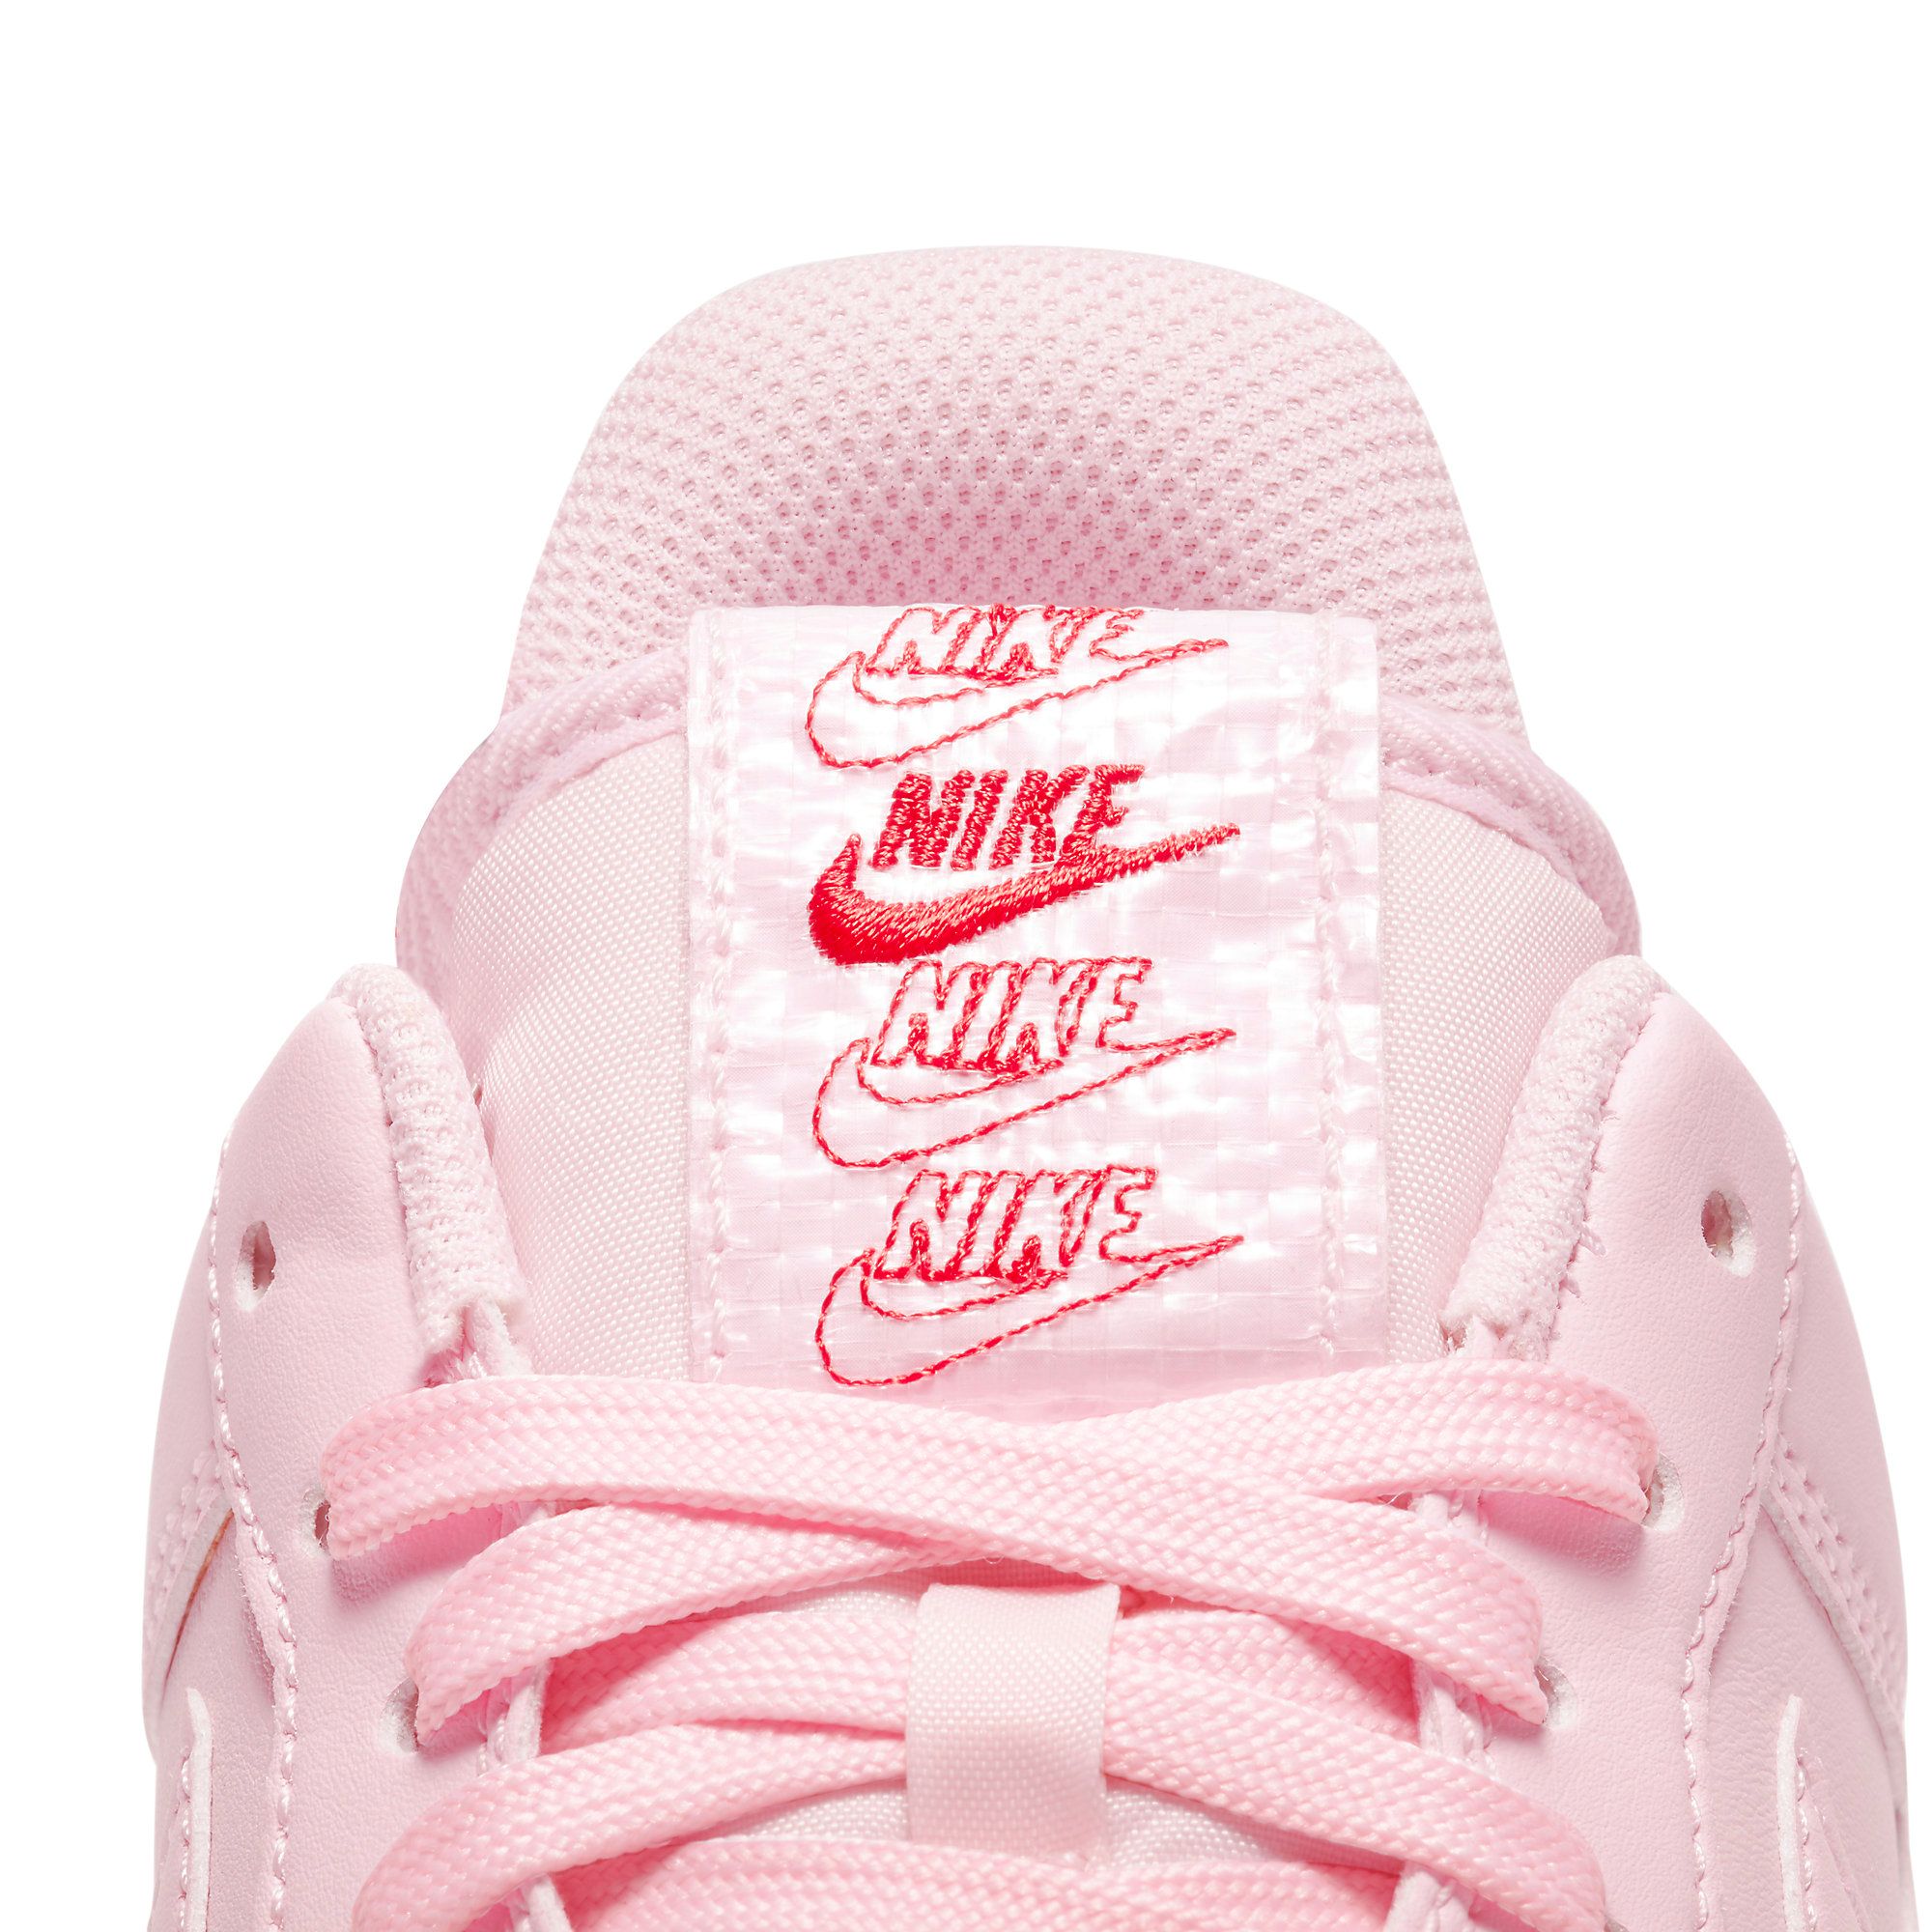 The Bodega Bag-Inspired Air Force 1 Low “Rose” Restocks This Month! | House  of Heat°